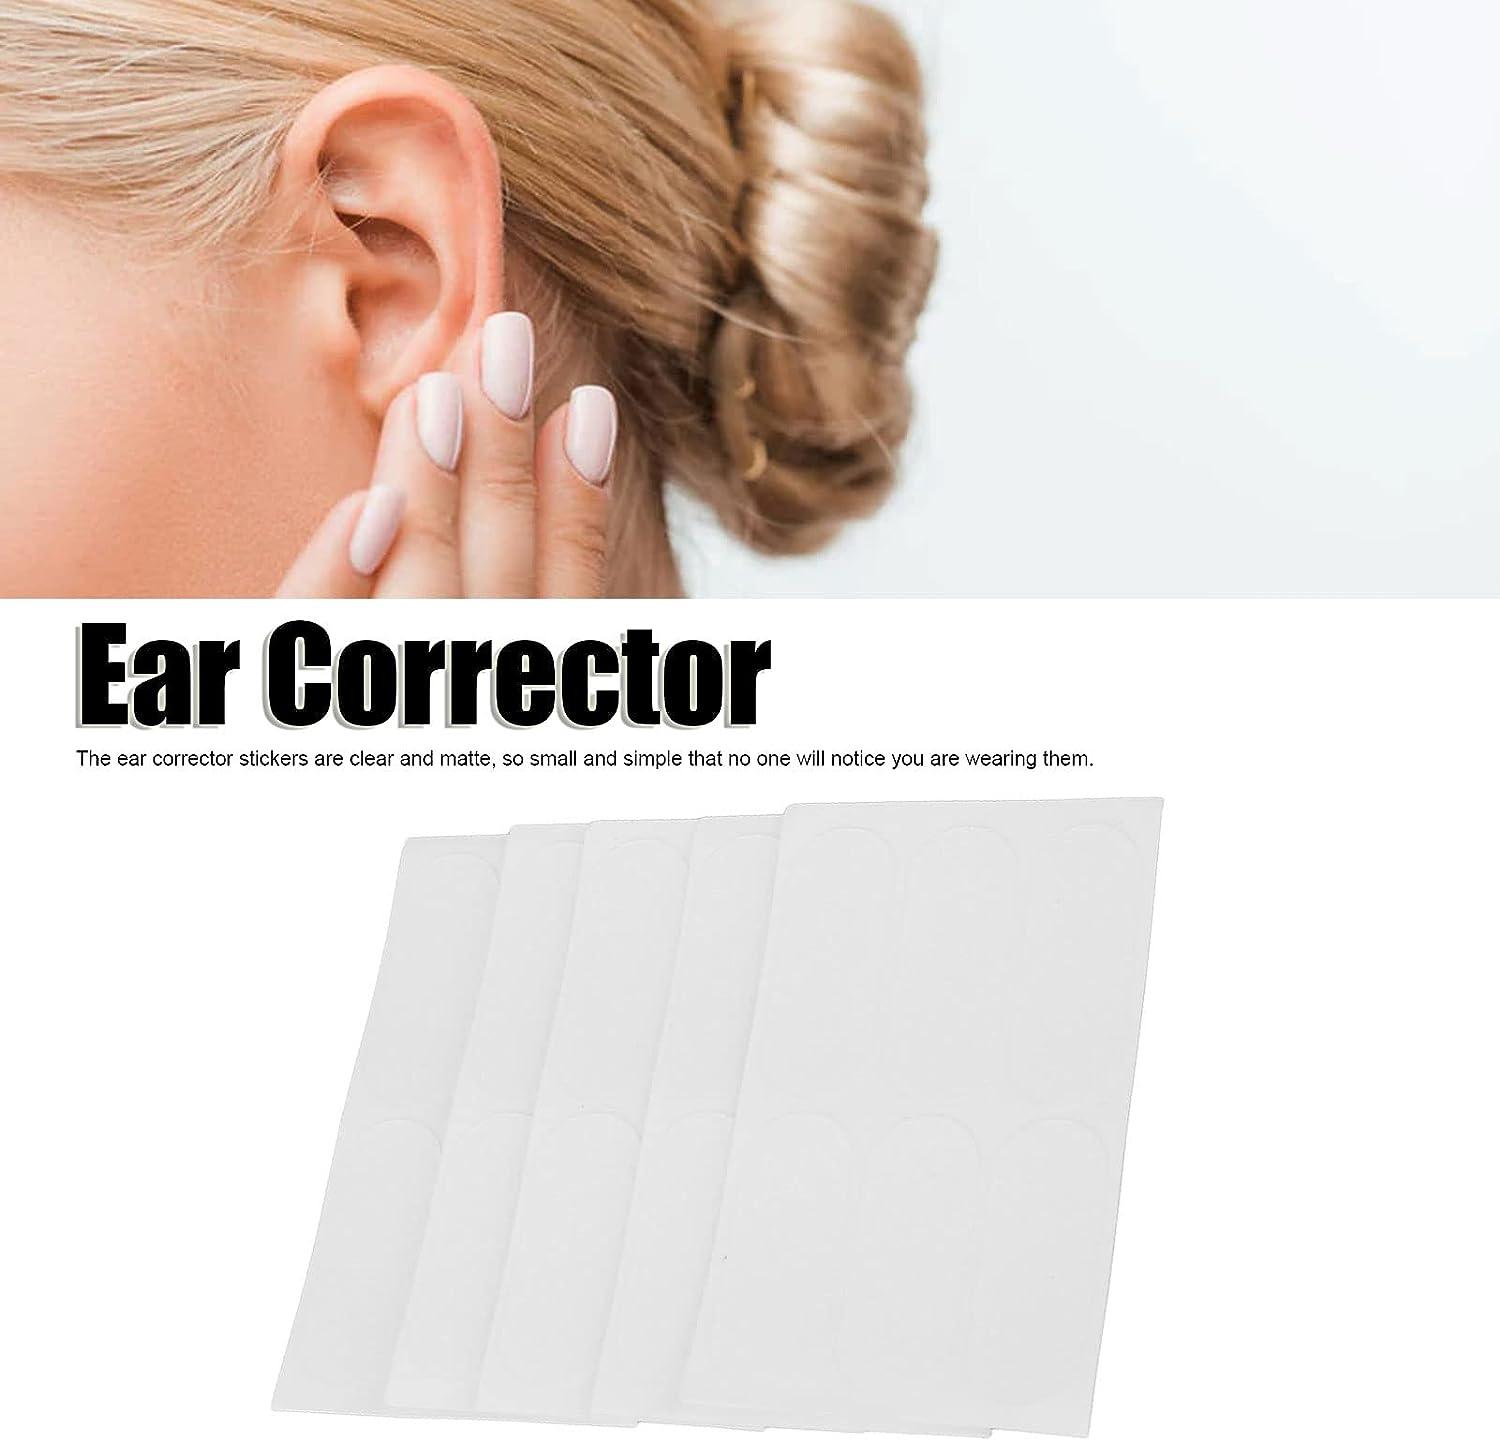 EARLAP Ear Corrector, Contain 20 Ear Tape, Solve Big Ear Problem with Ear  Stickers by Pinning Back Ears, Cosmetic Aesthetic Correctors for Prominent